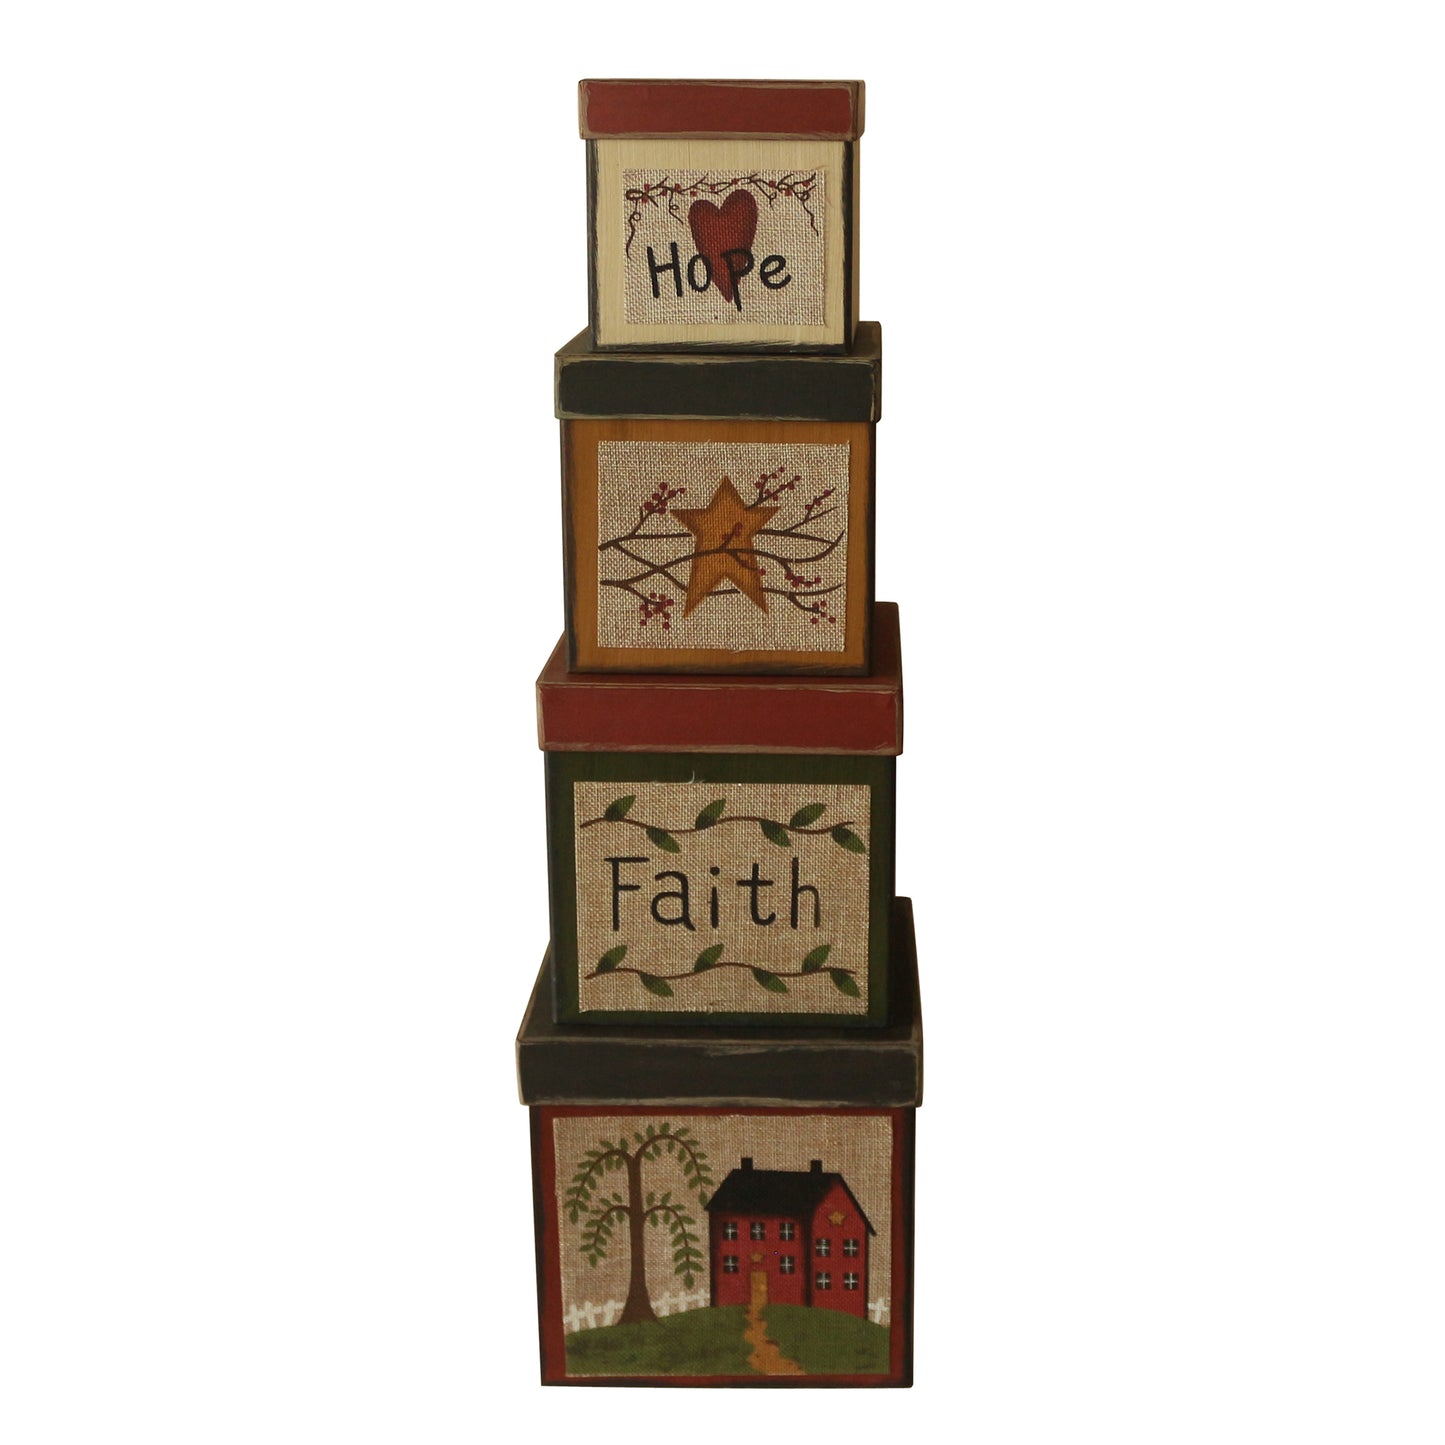 CVHOMEDECO. Square Primitive Vintage Hope Faith Star House Collectibles Cardboard Nesting Boxes, Large 8 x 8 x 8 Inch, Set of 4.